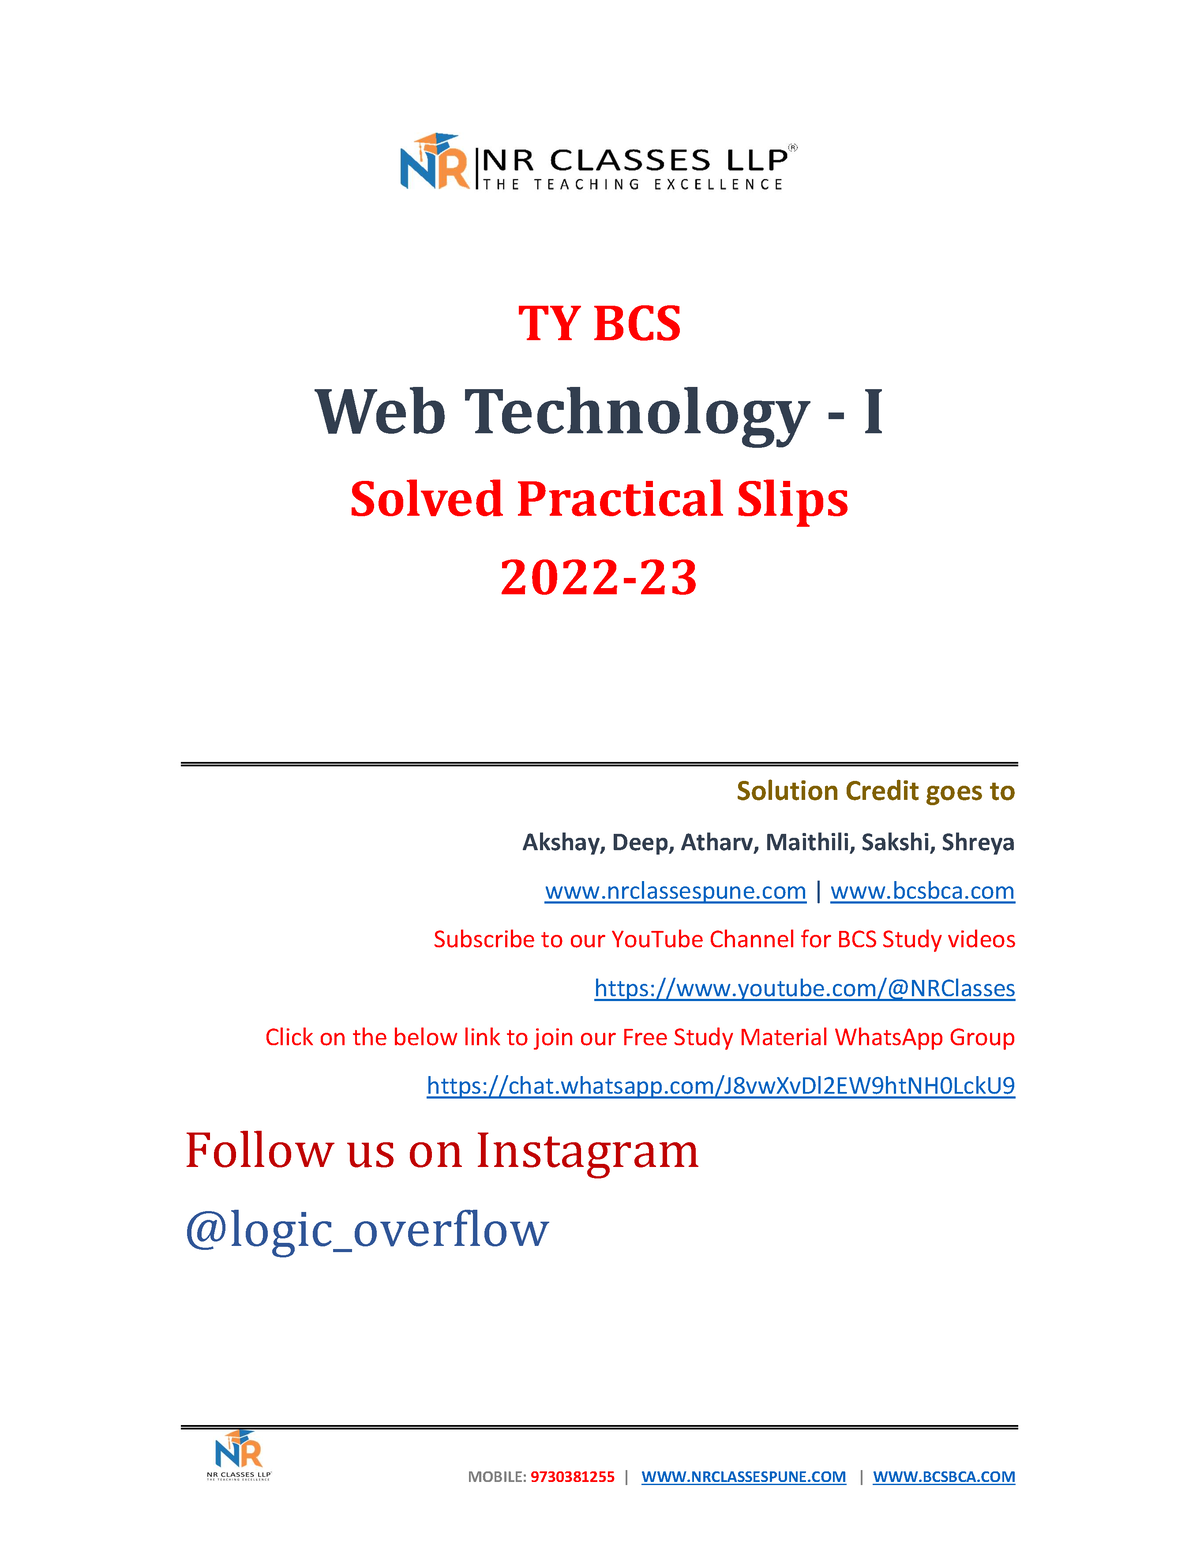 tybcs php assignment 6